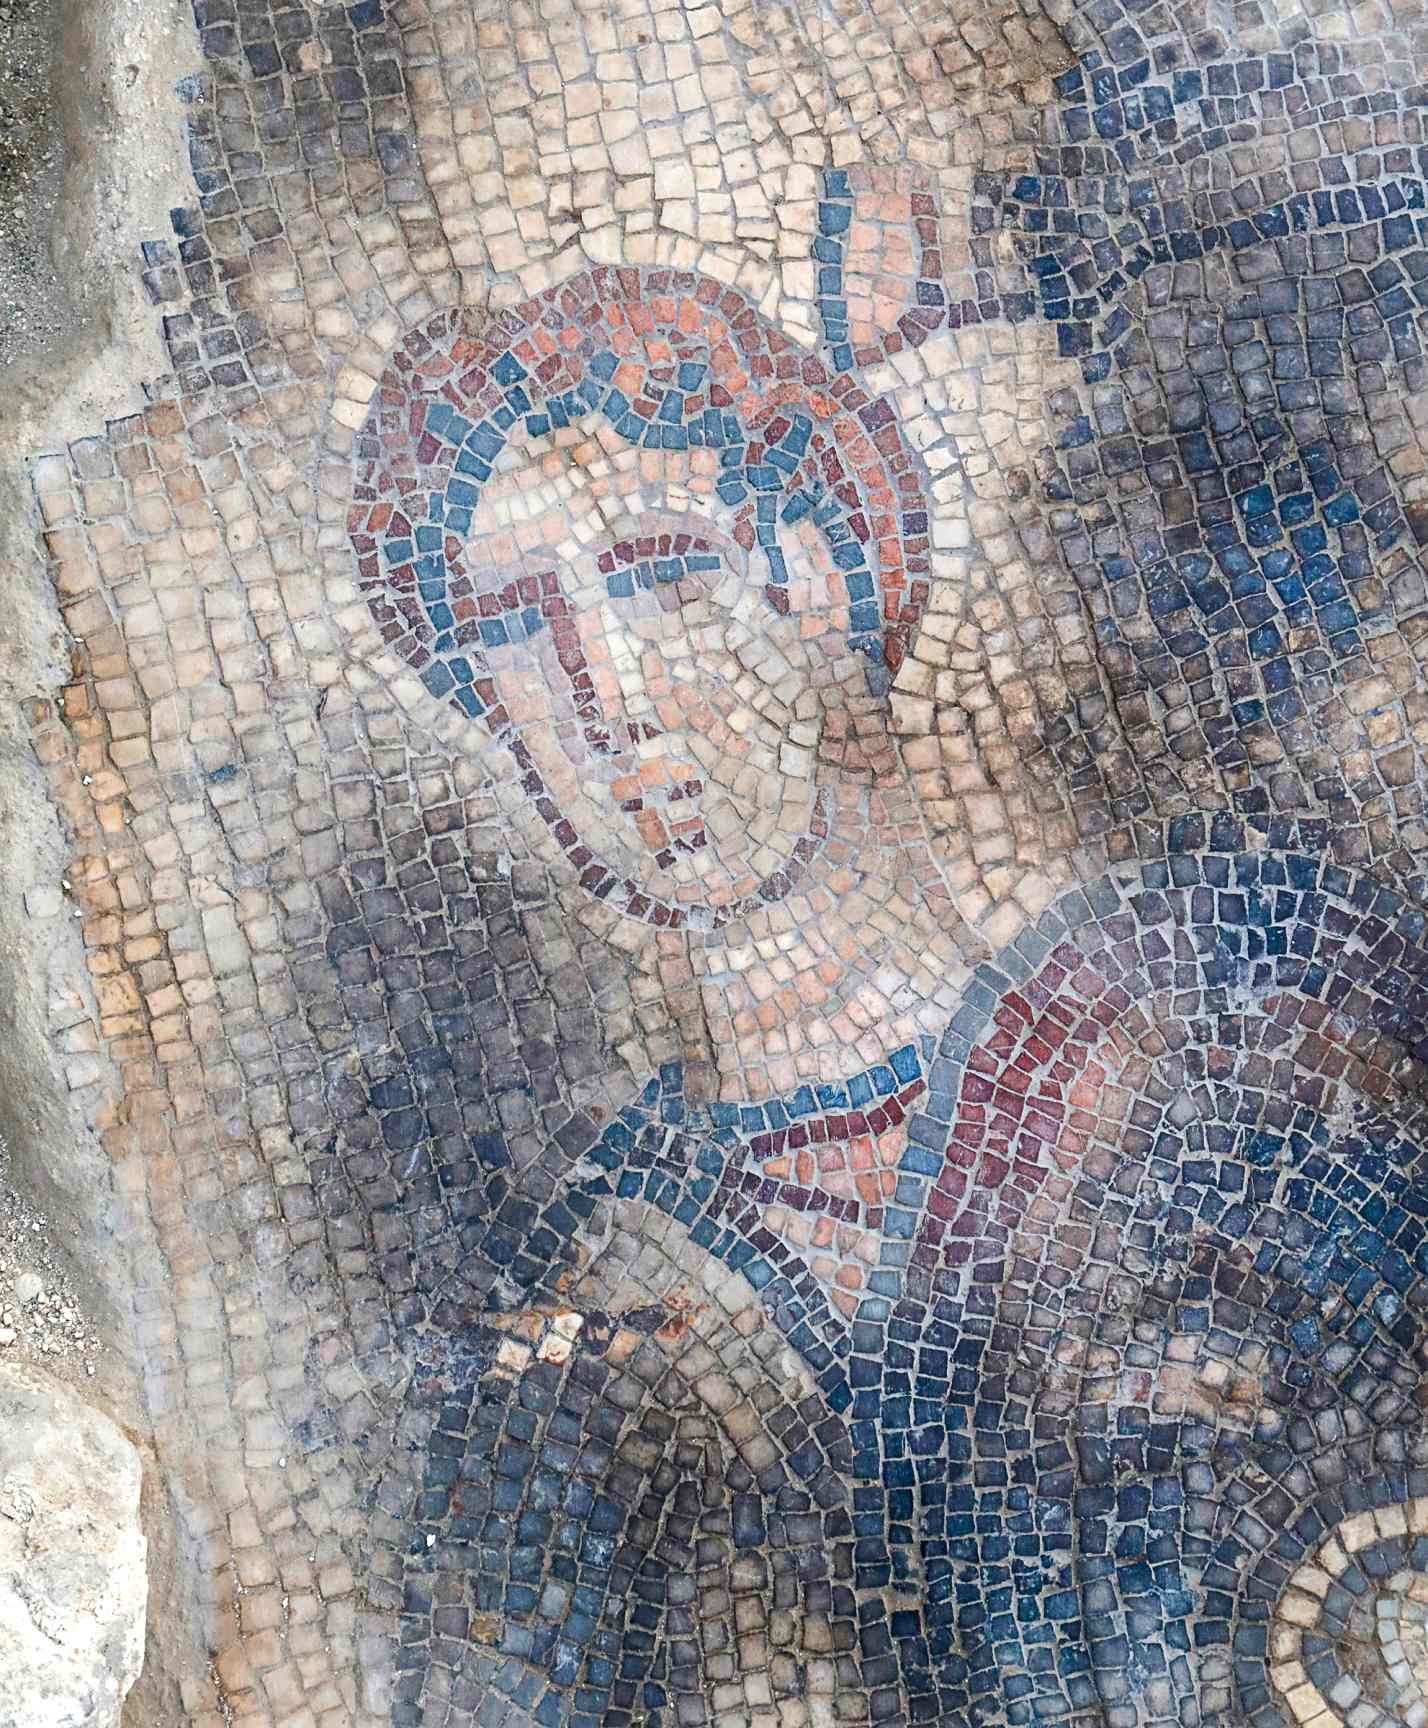 Dead philistine soldier, detail from the Samson carrying the gate of Gaza mosaic, Huqoq synagogue, June 2023.